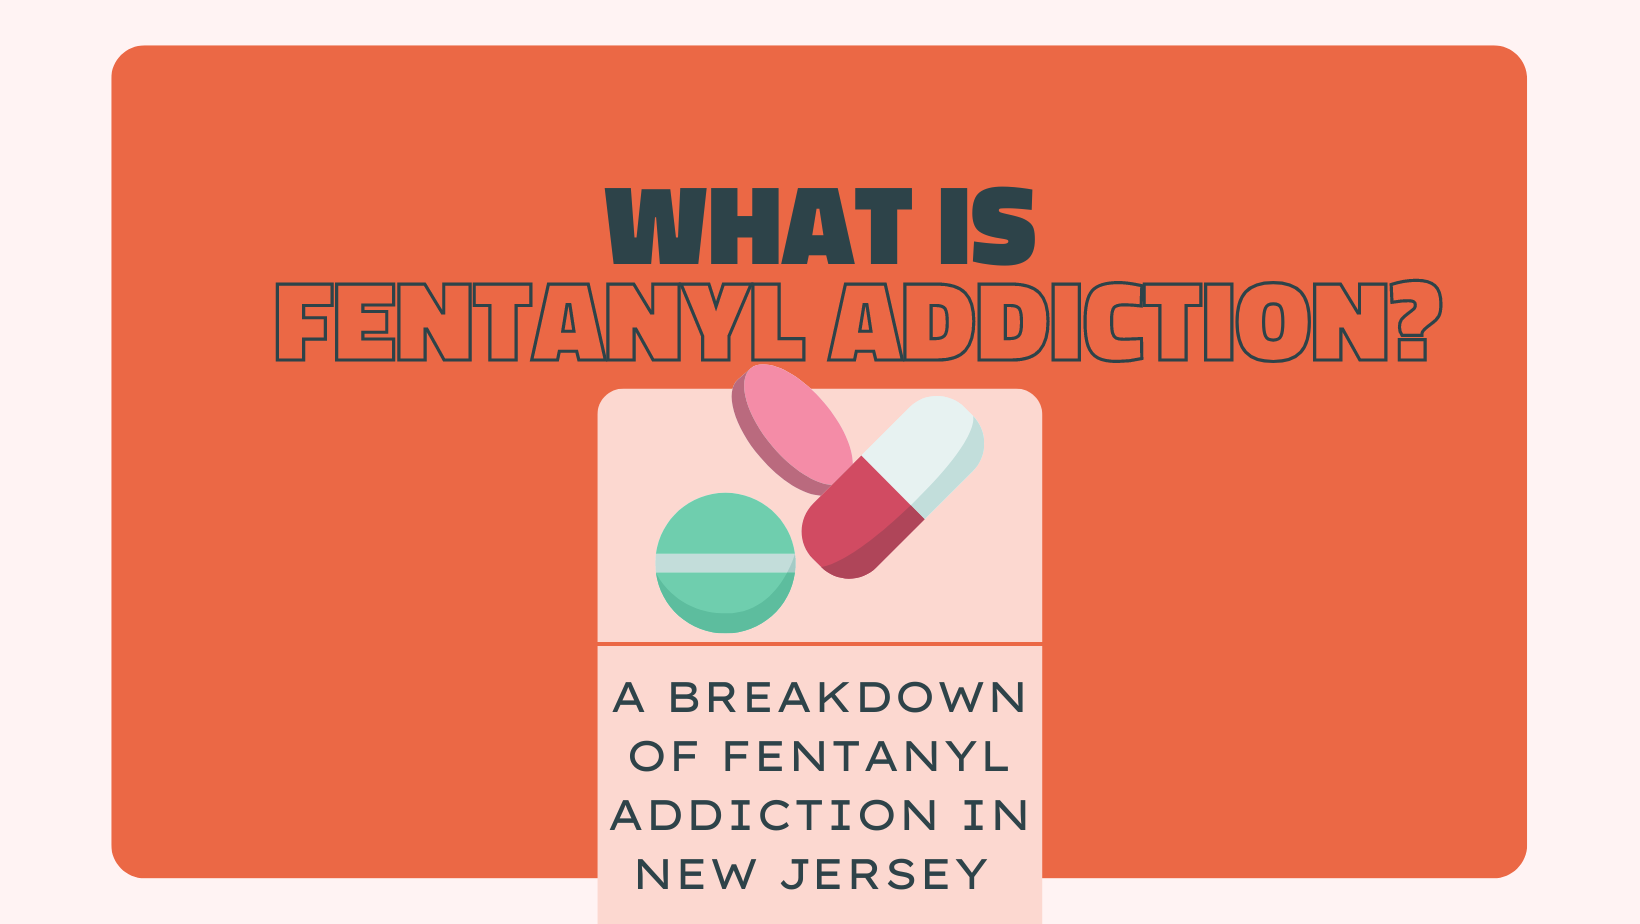 What Is Fentanyl Addiction?